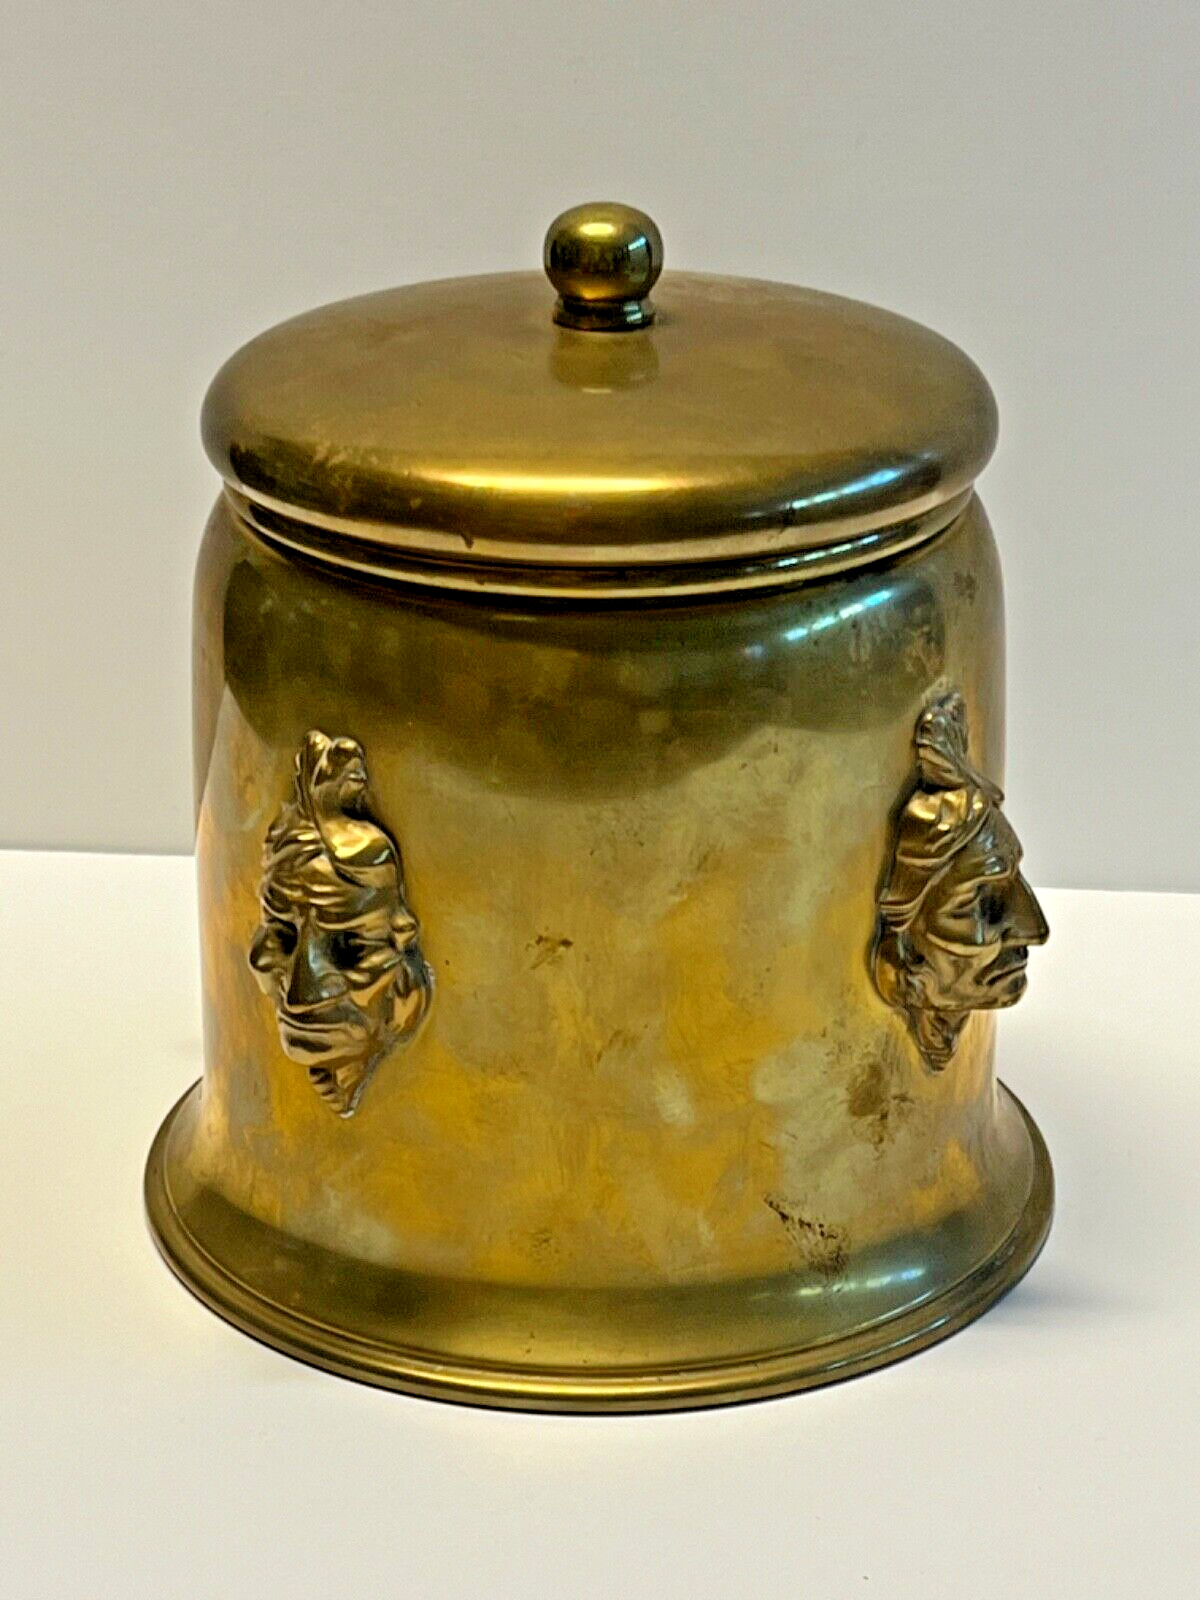 Antique Cigar Brass Humidor; Native American Indian theme; Early 1900s